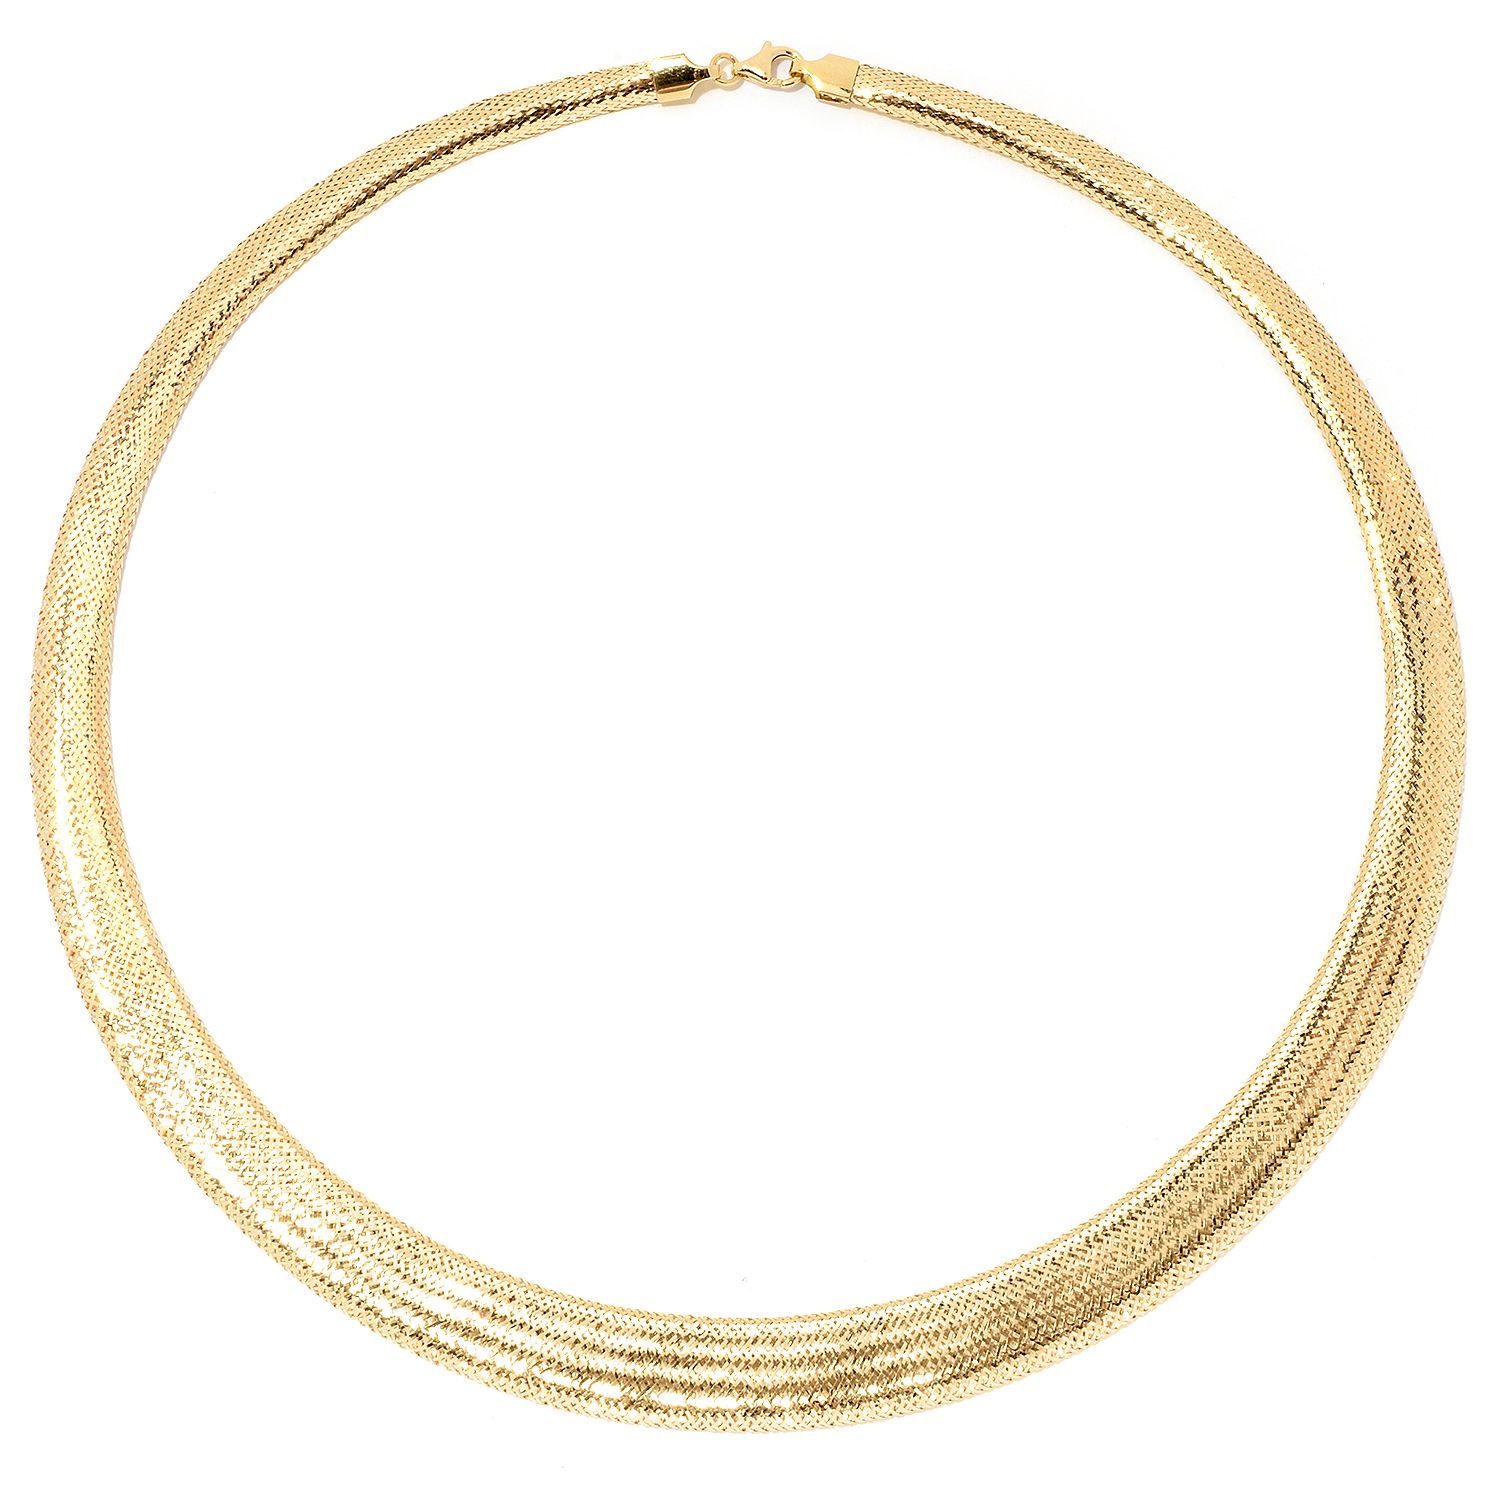 (ShopHQ) Stefano Oro 14K Gold Choice of Length Mesh Necklace, 4.56 ...